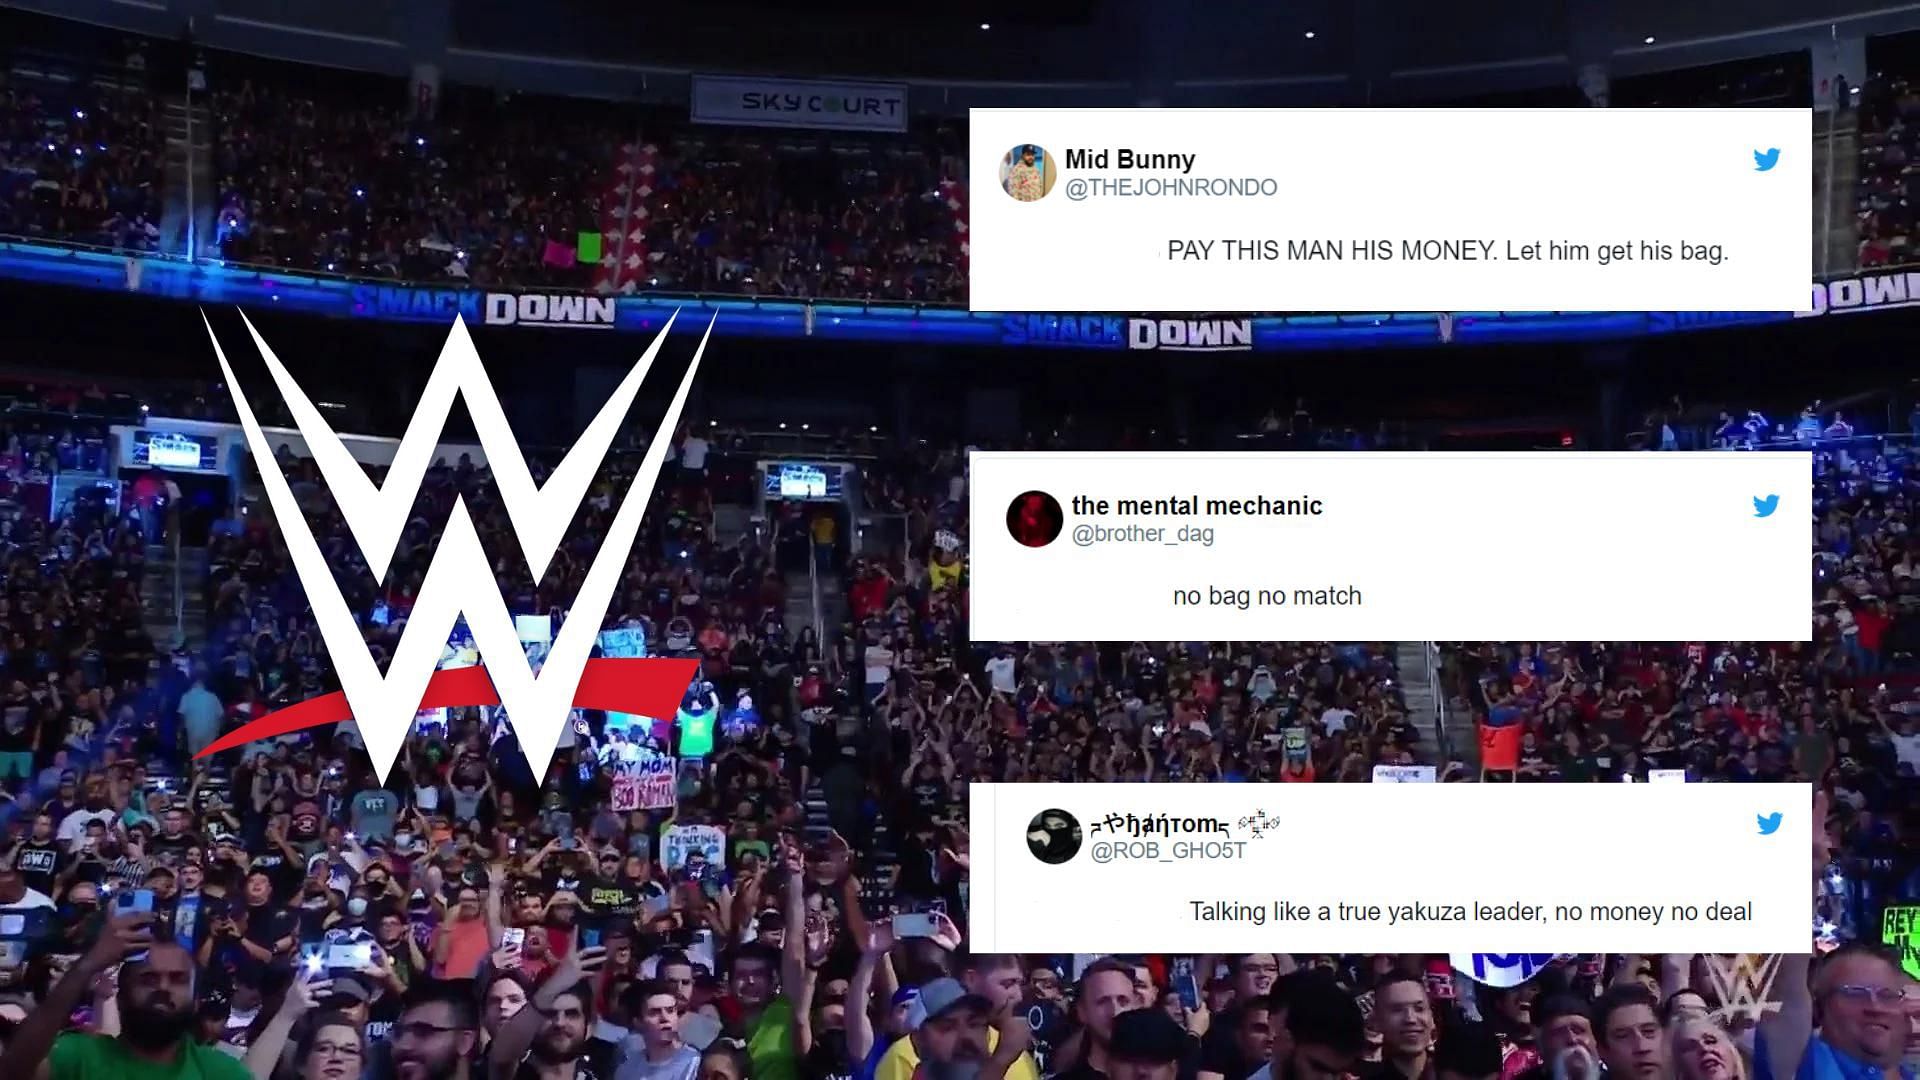 WWE is a Stamford-based wrestling promotion